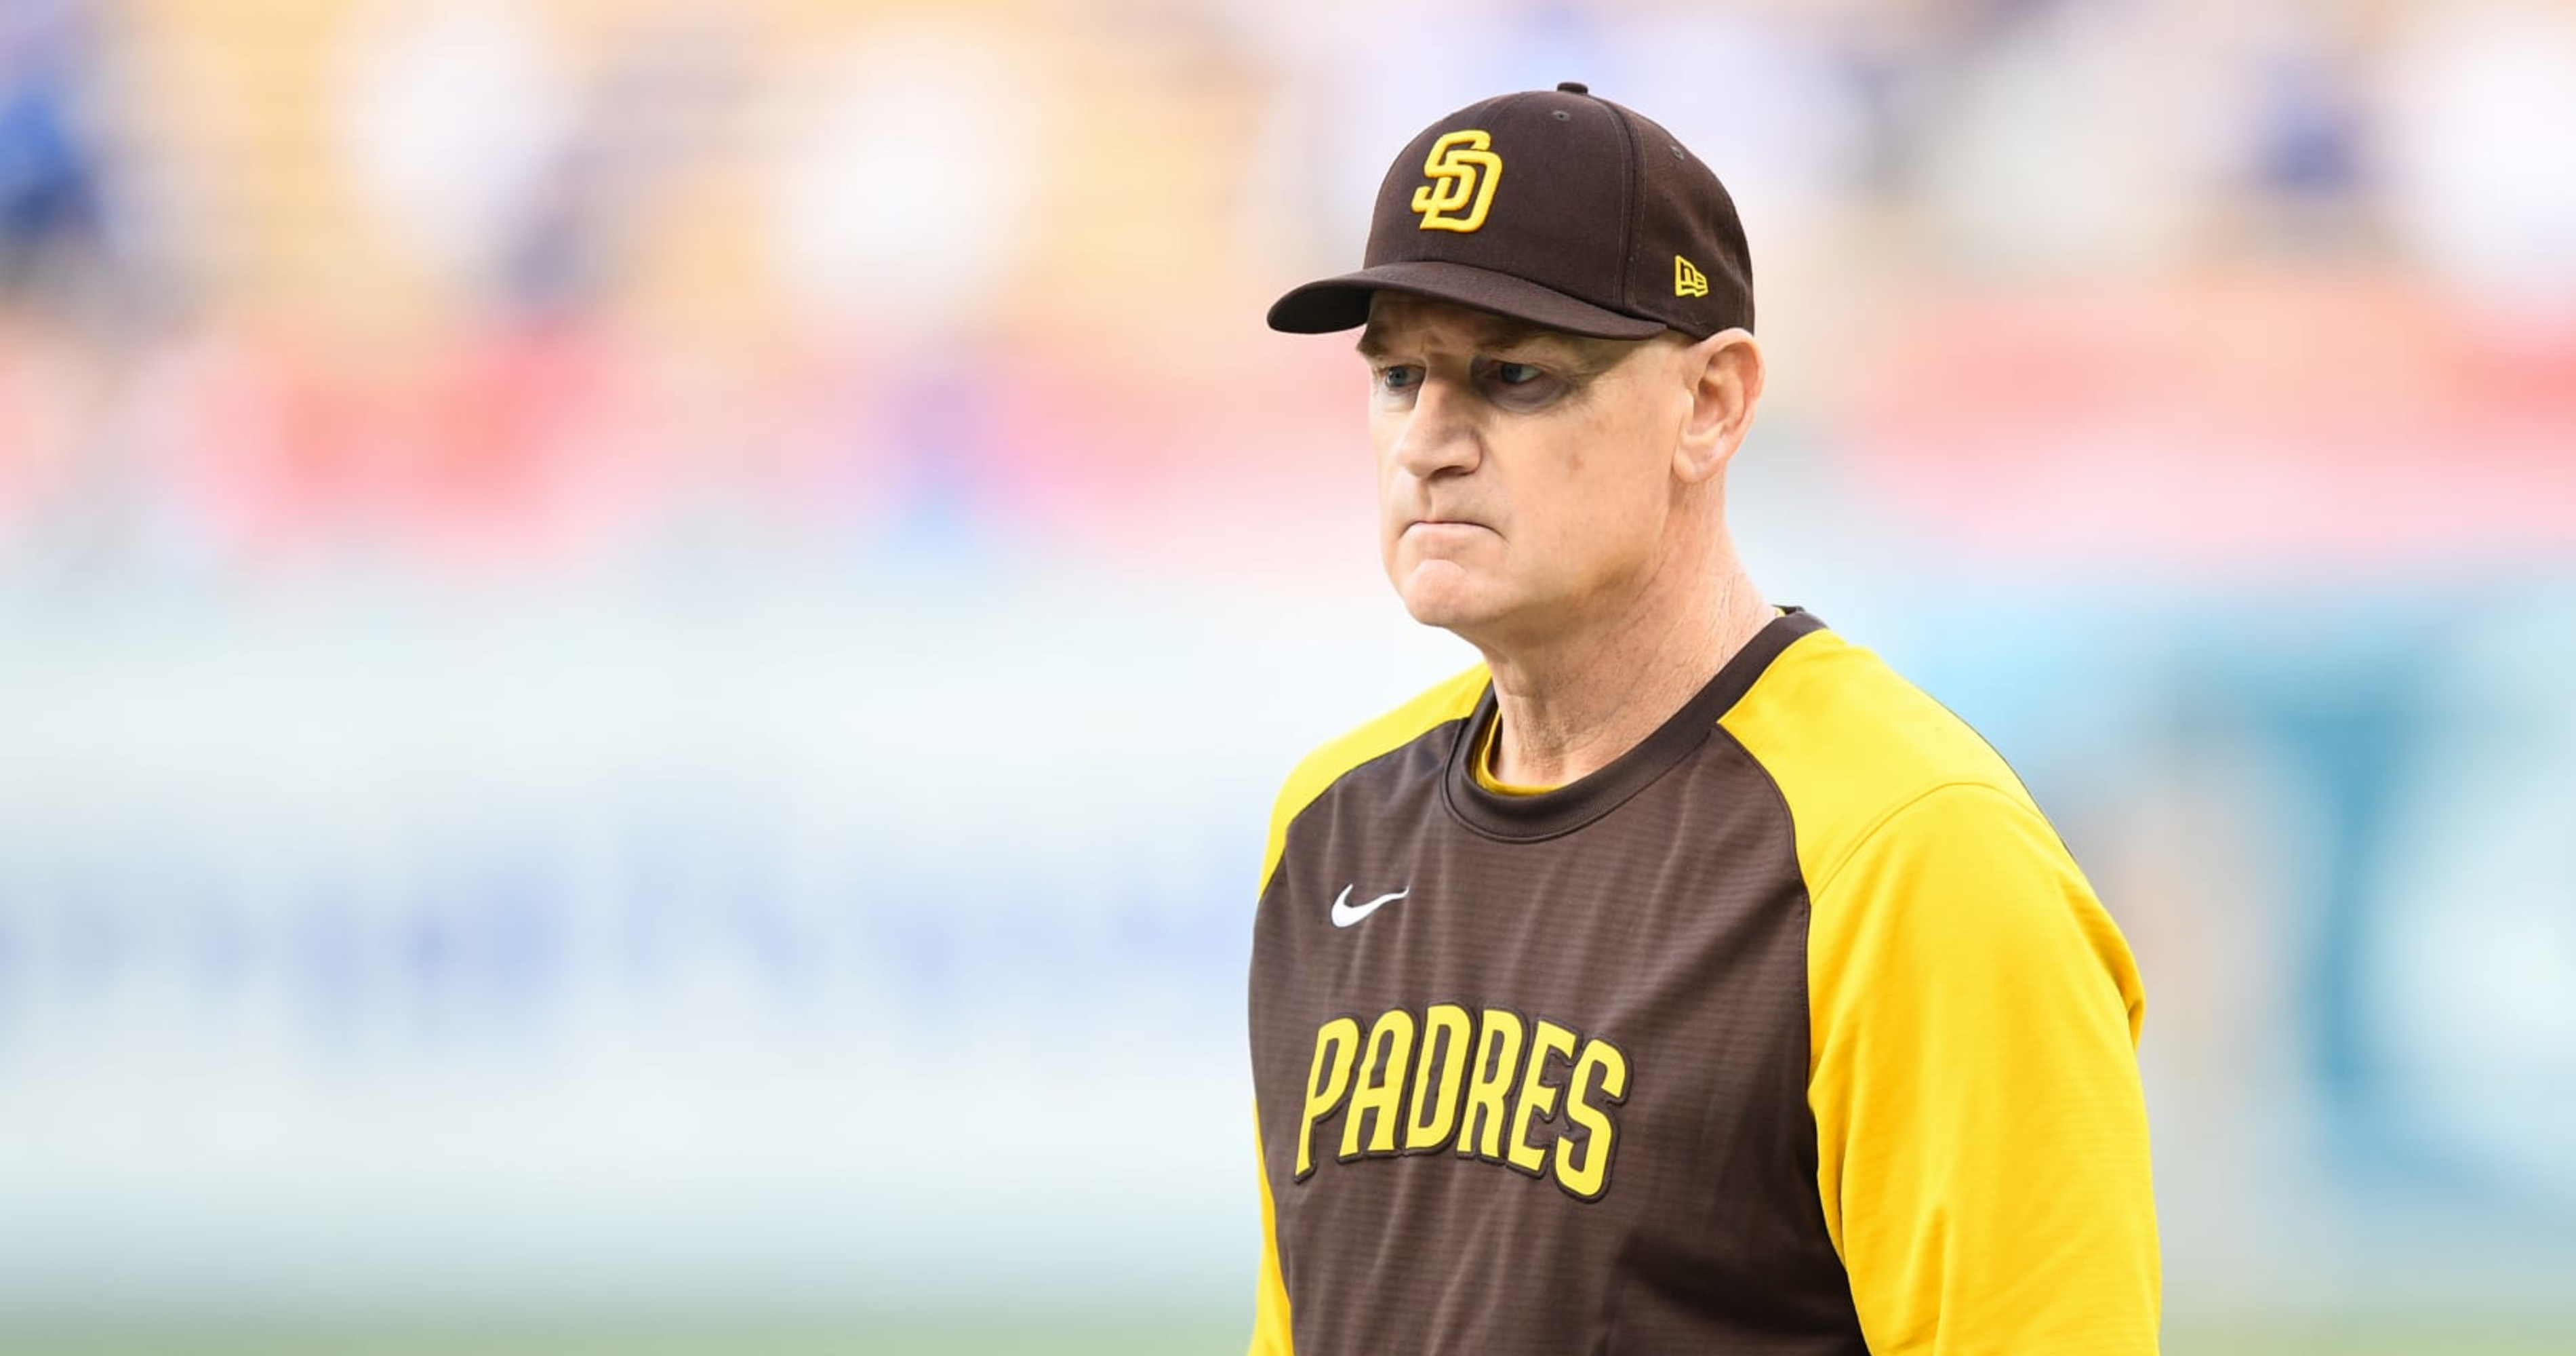 Padres Coach Matt Williams Diagnosed With Colon Cancer, Will Take Leave